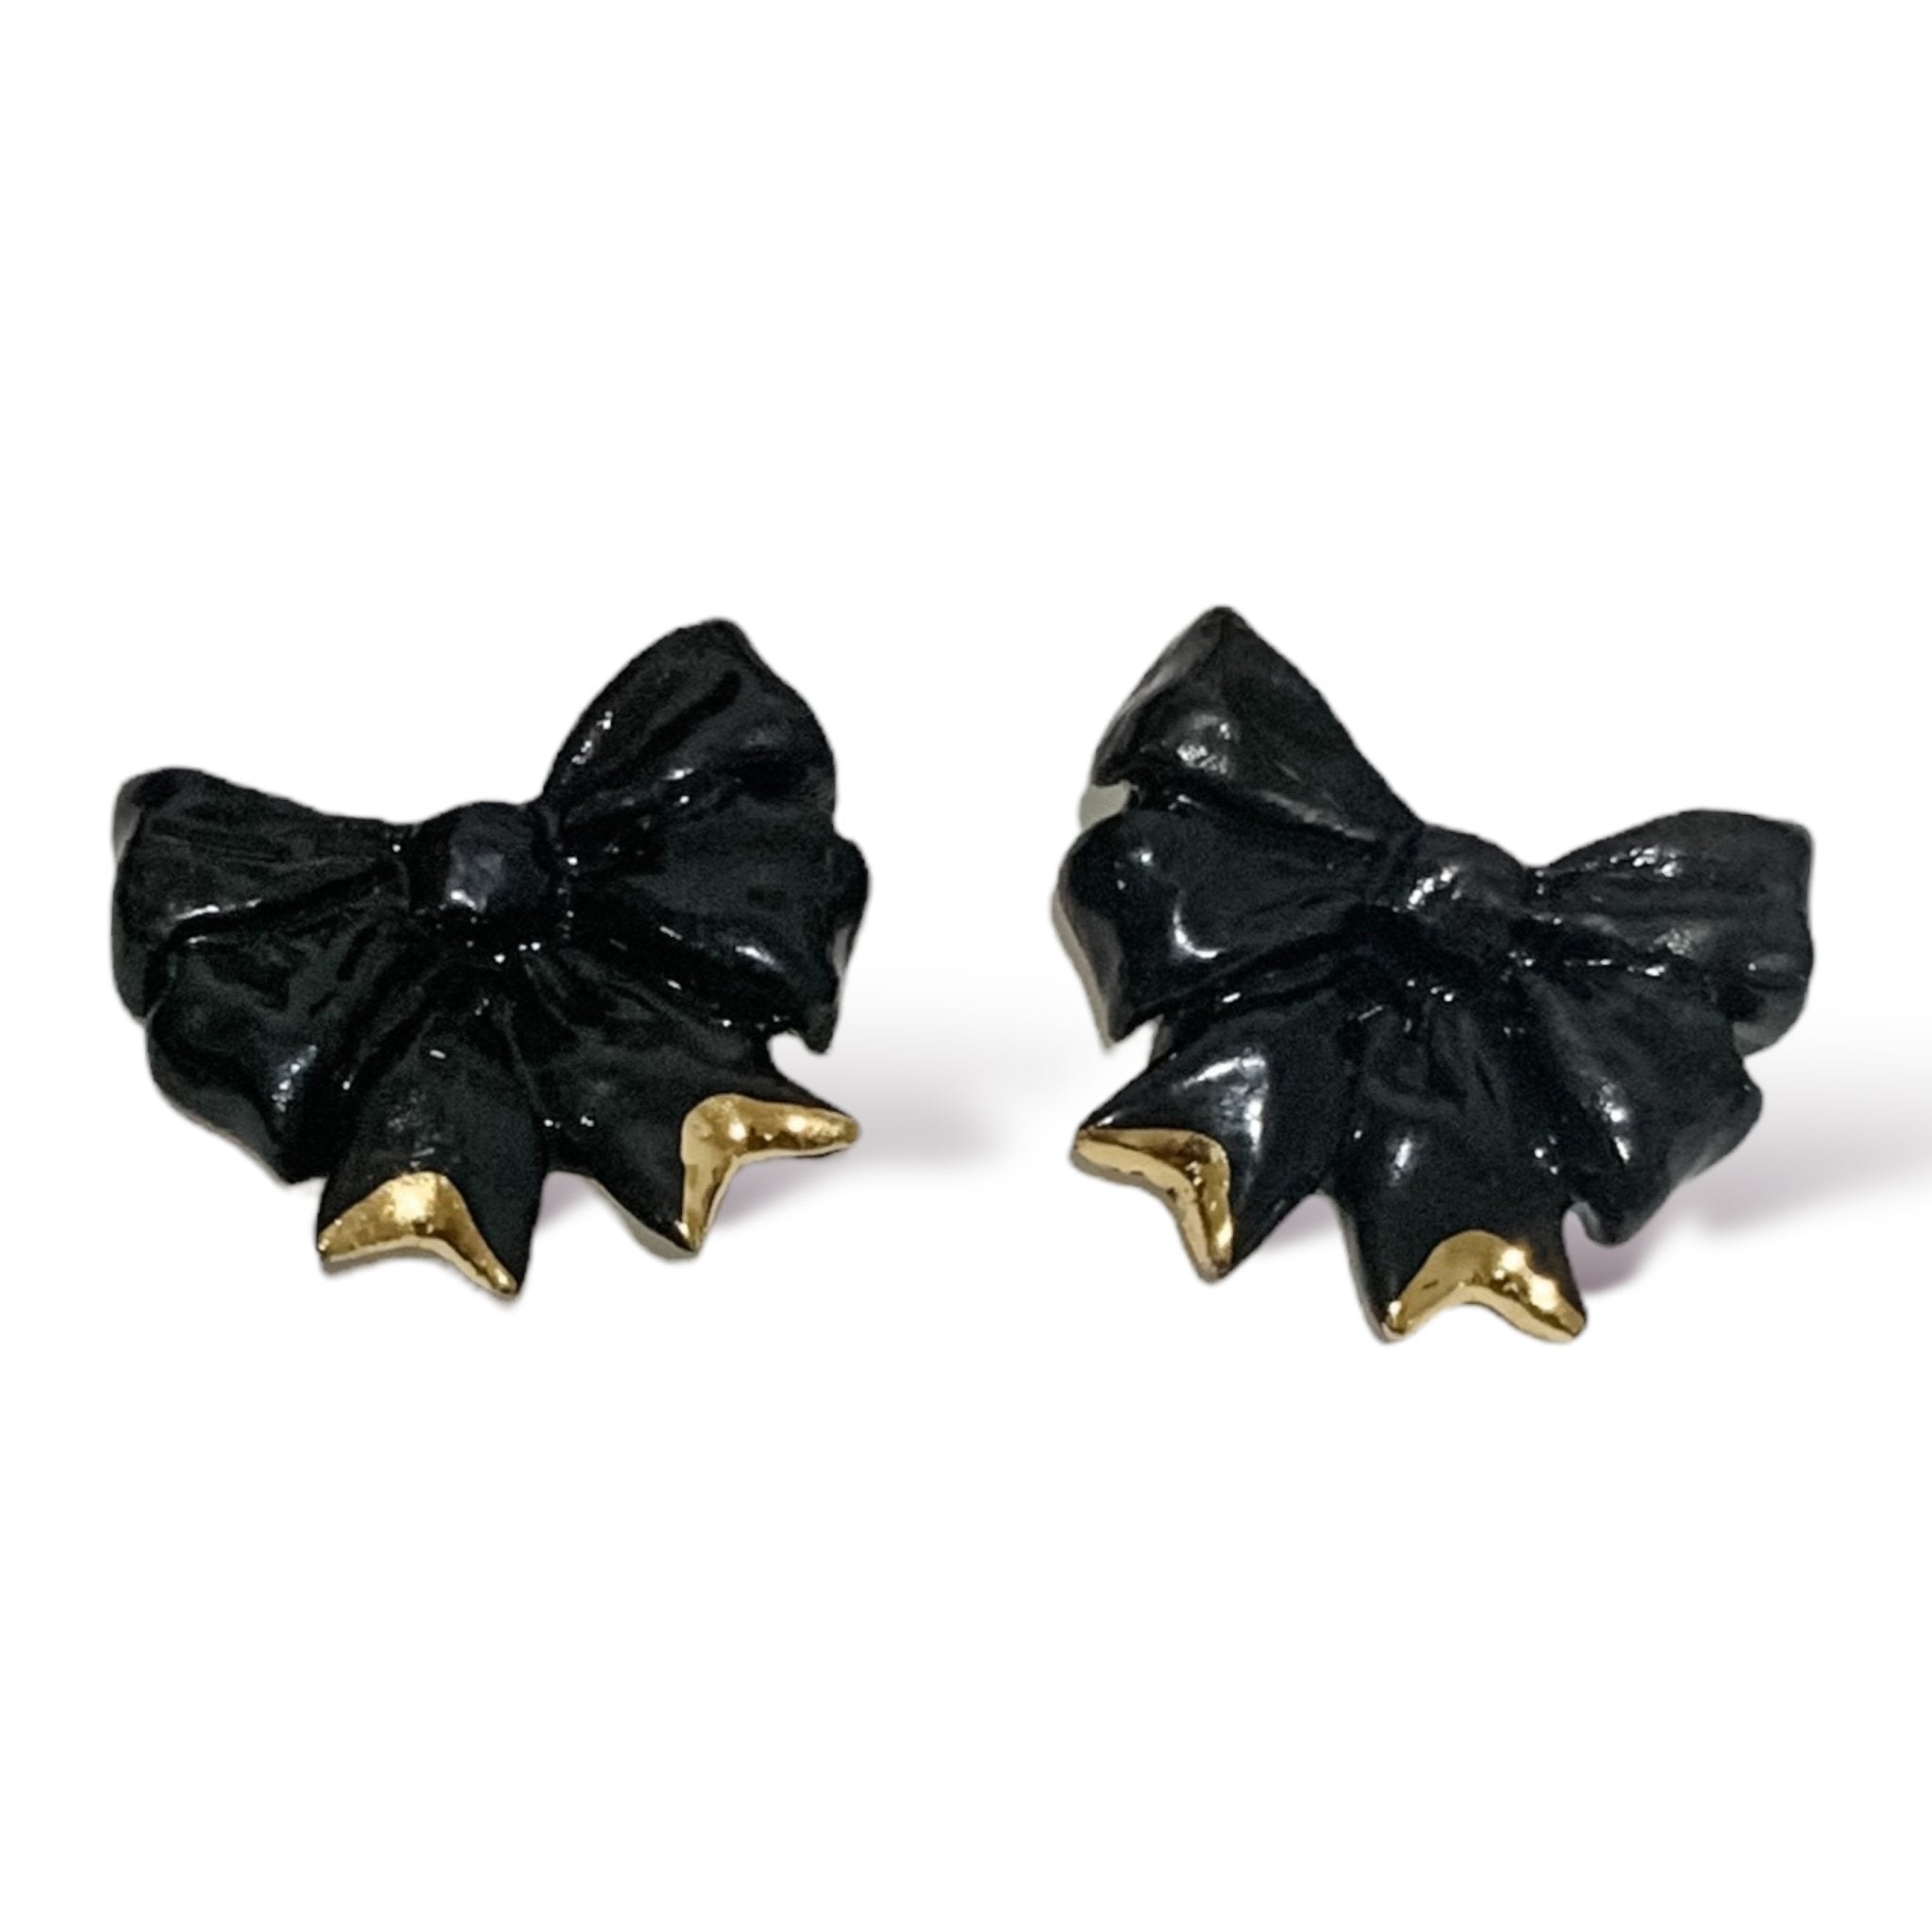 black-bow-studs-by-susan-gordon-pottery-accessories-jewelry-earrings-georgia-kate